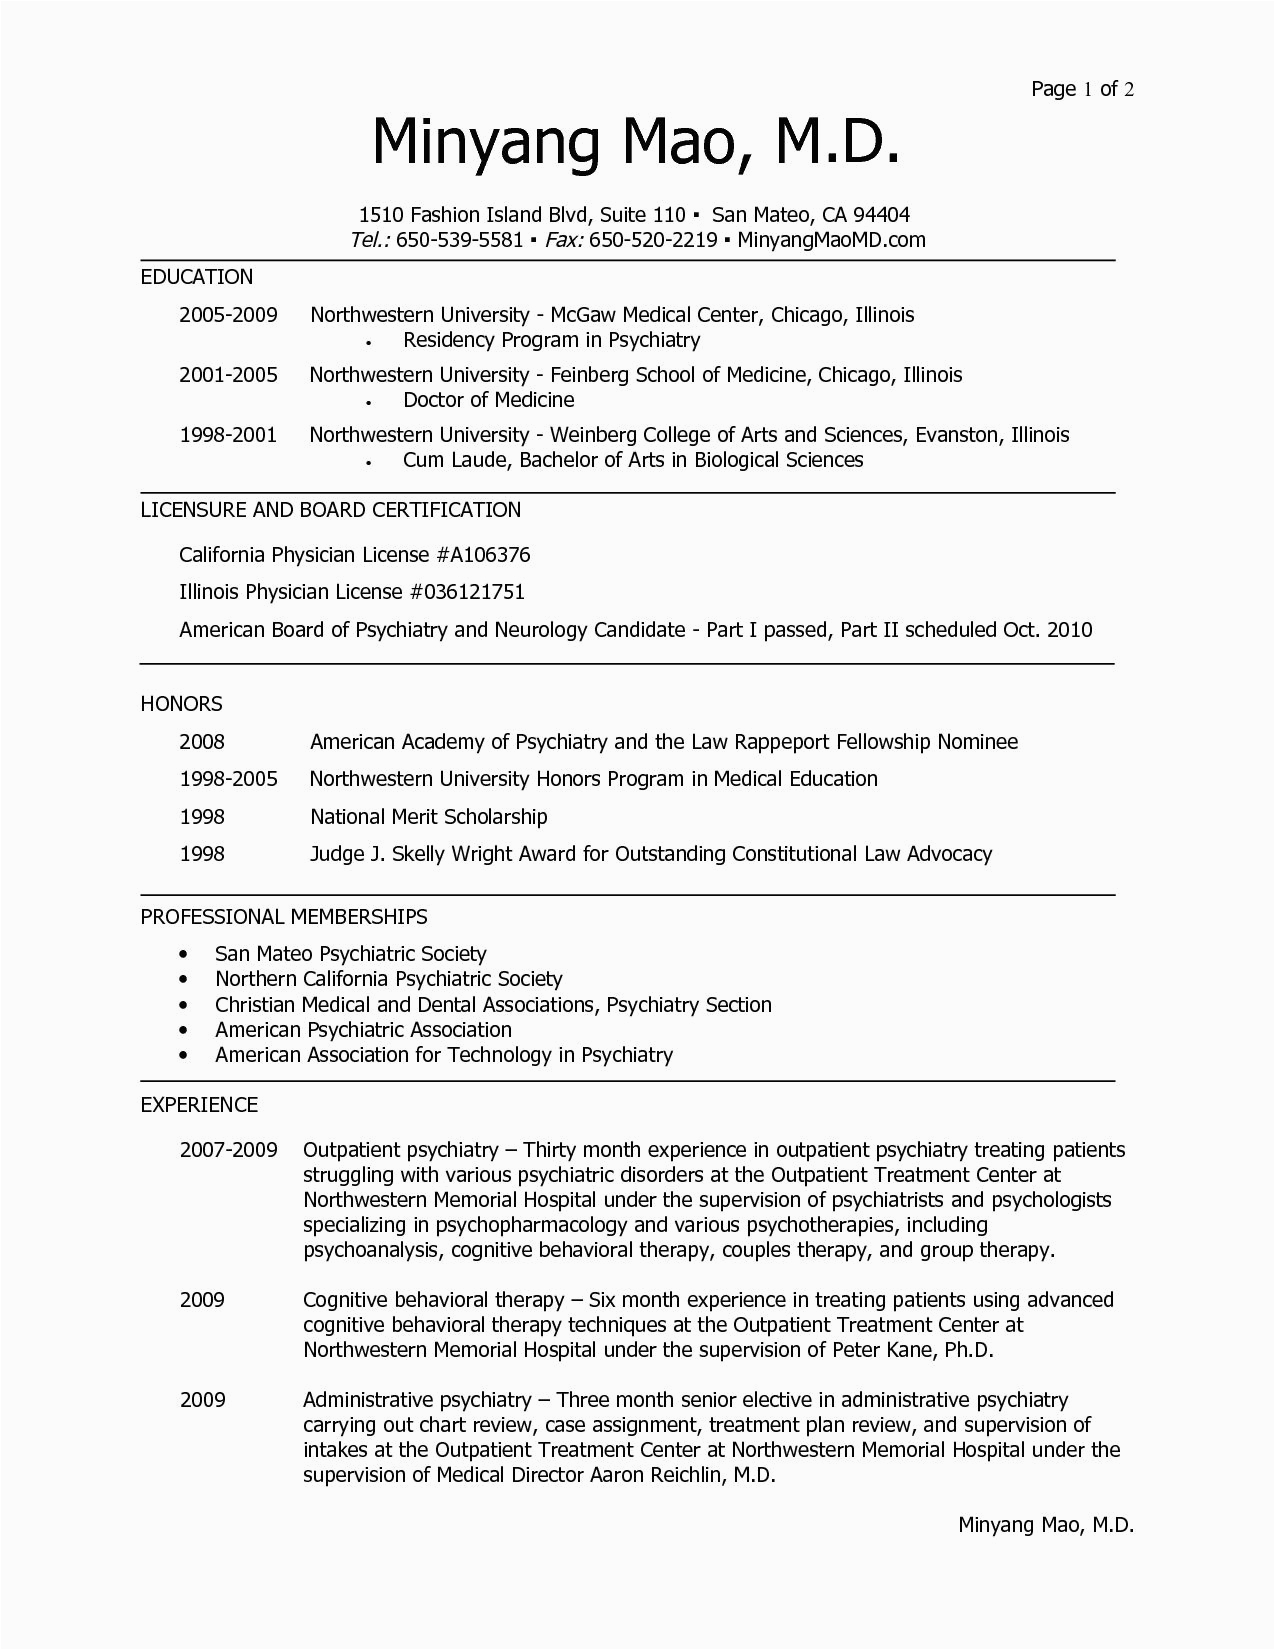 Resume for Medical School Application Sample Medical School Resume Template Medical School Resume Example Fb238a1b2